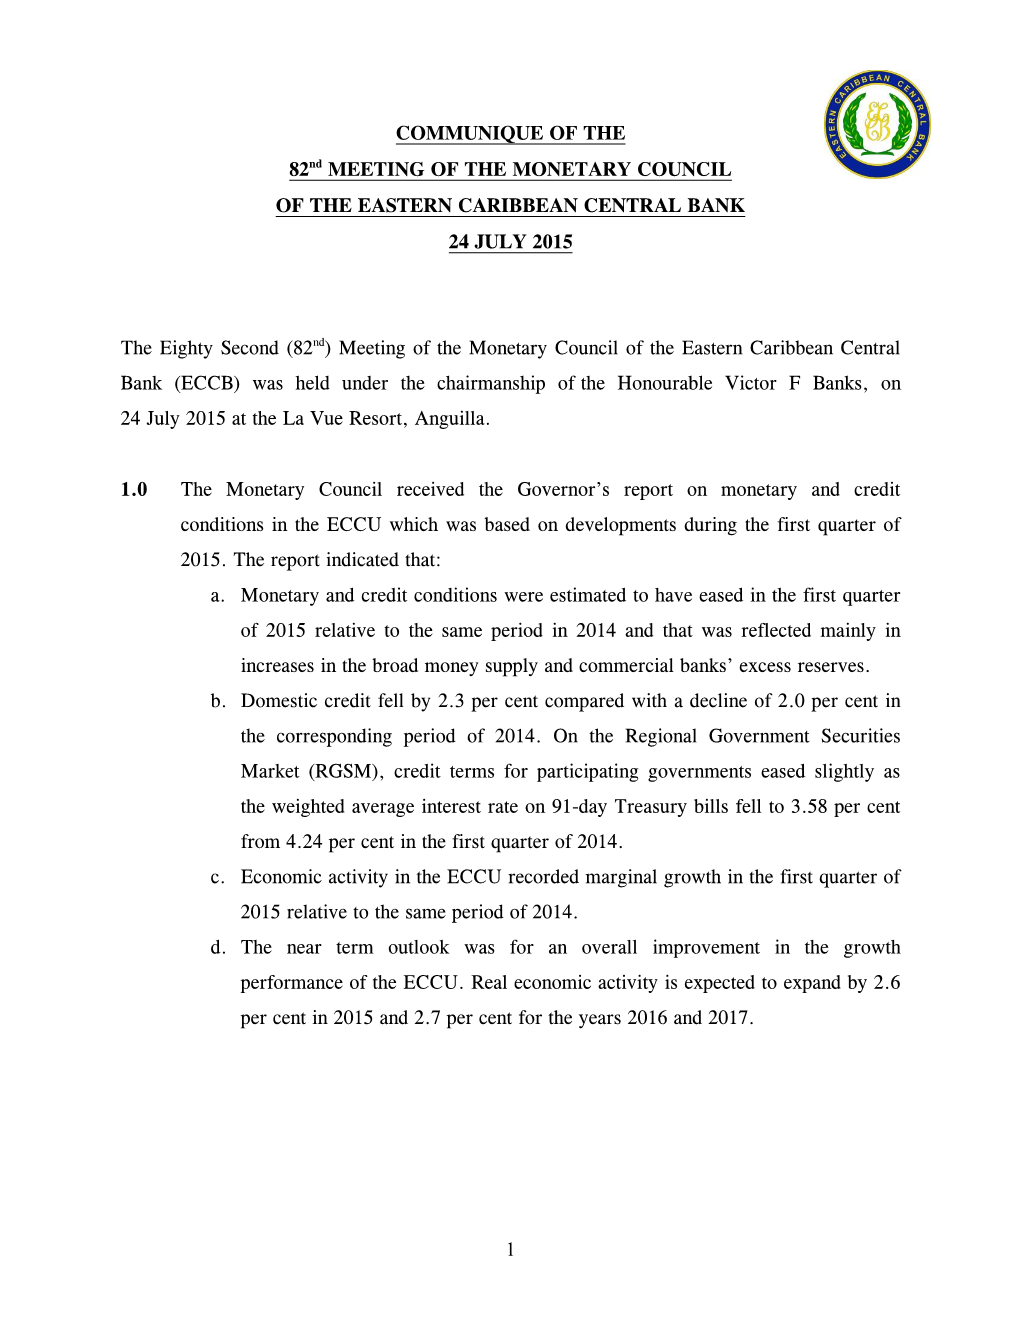 COMMUNIQUÉ of the 82Nd MEETING of the MONETARY COUNCIL of the EASTERN CARIBBEAN CENTRAL BANK 24 JULY 2015